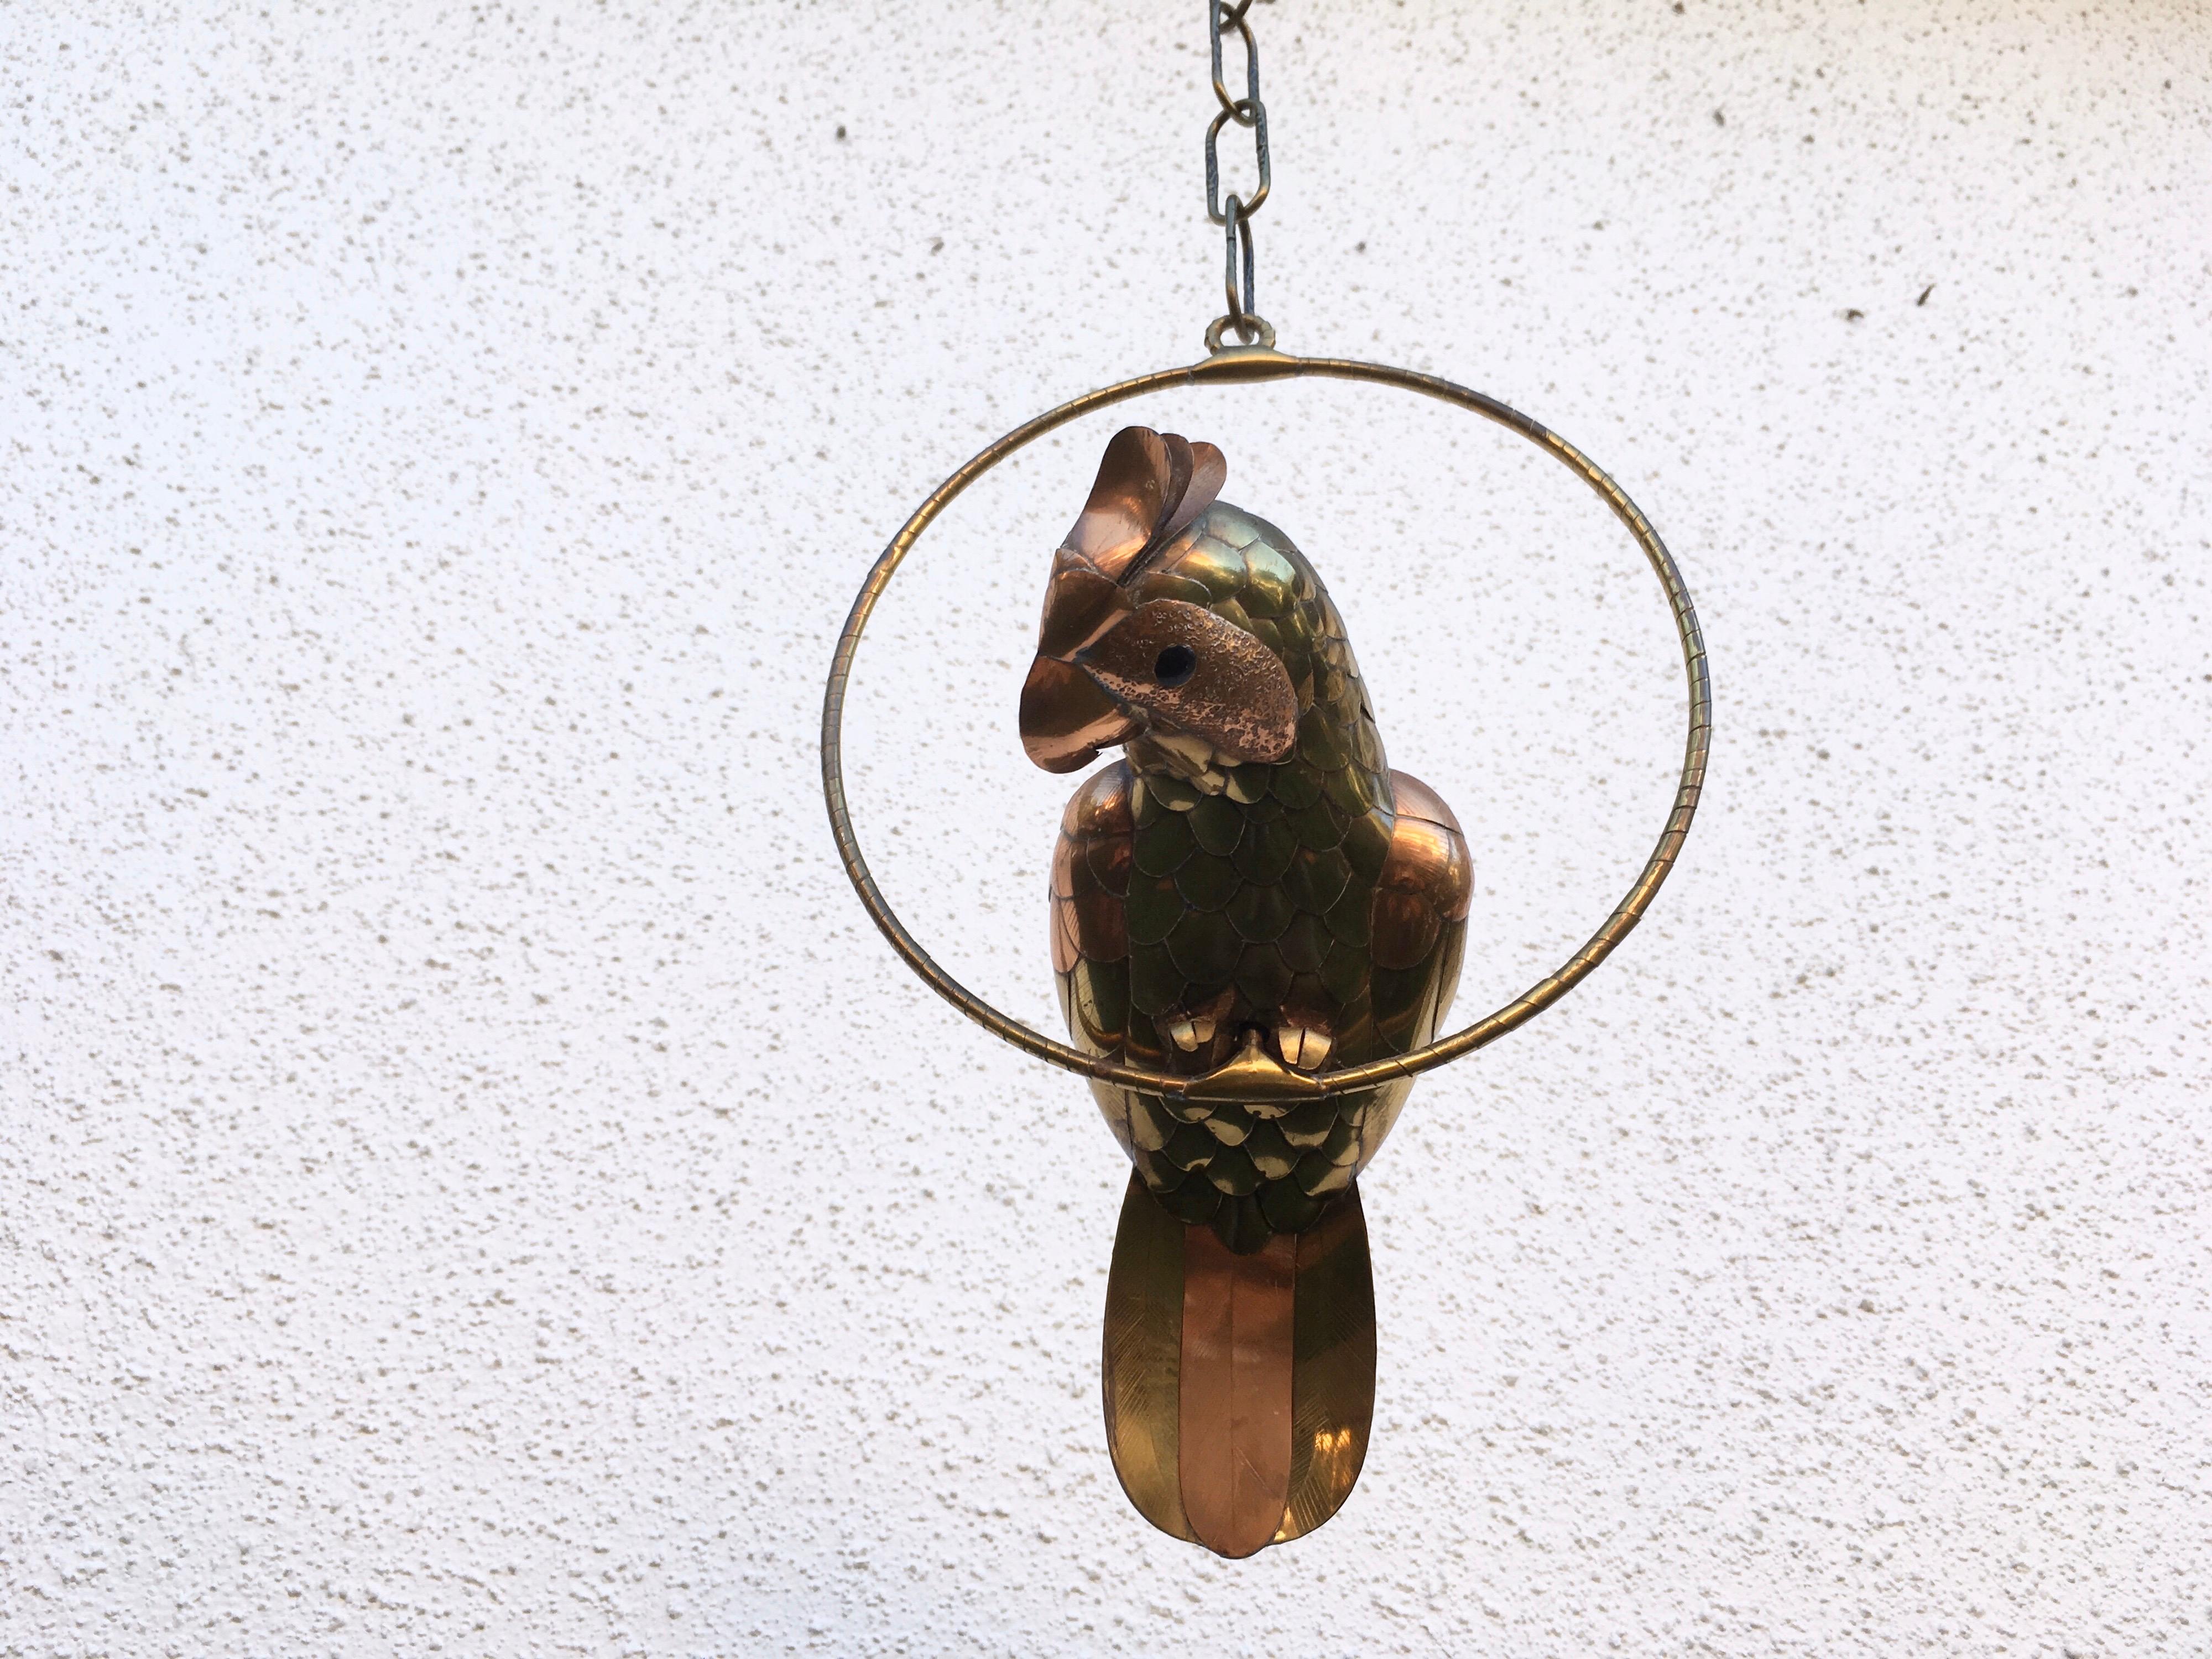 Brass and cooper parrot on swing with chain by Sergio Bustamante.
Chain has only four links. Dimension provided include ring.